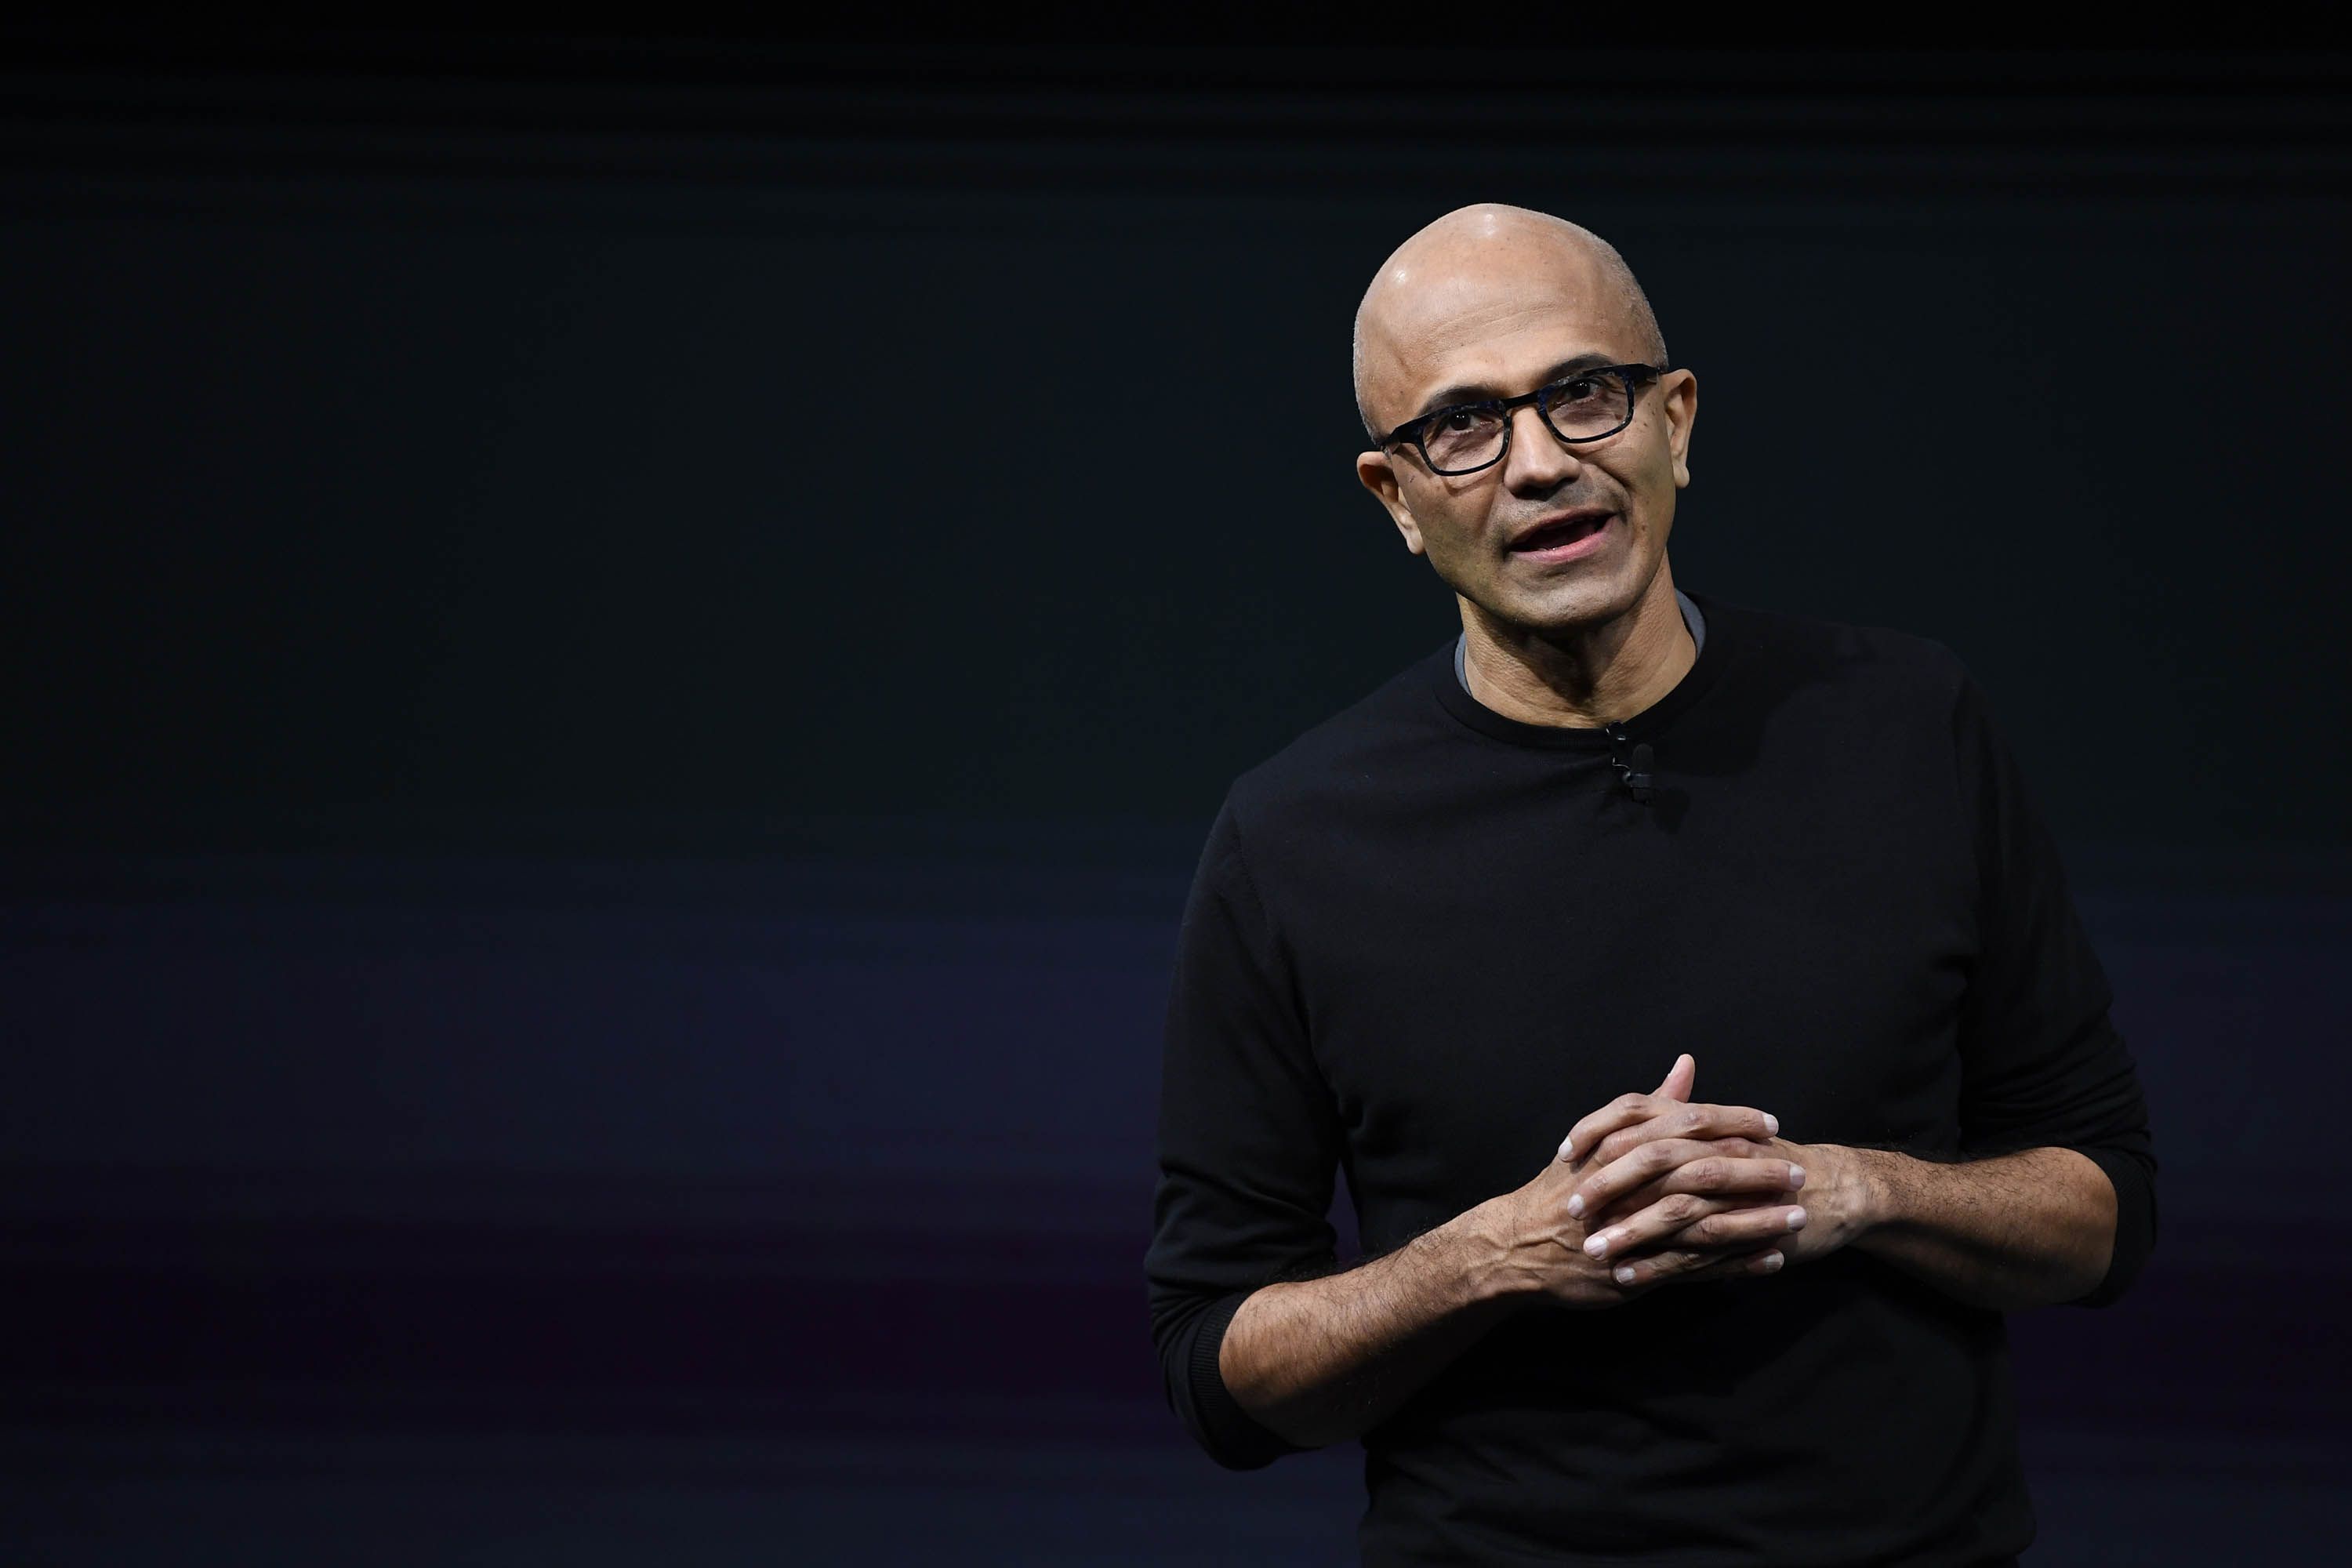 Microsoft CEO on trade, mixed reality and taking the long view